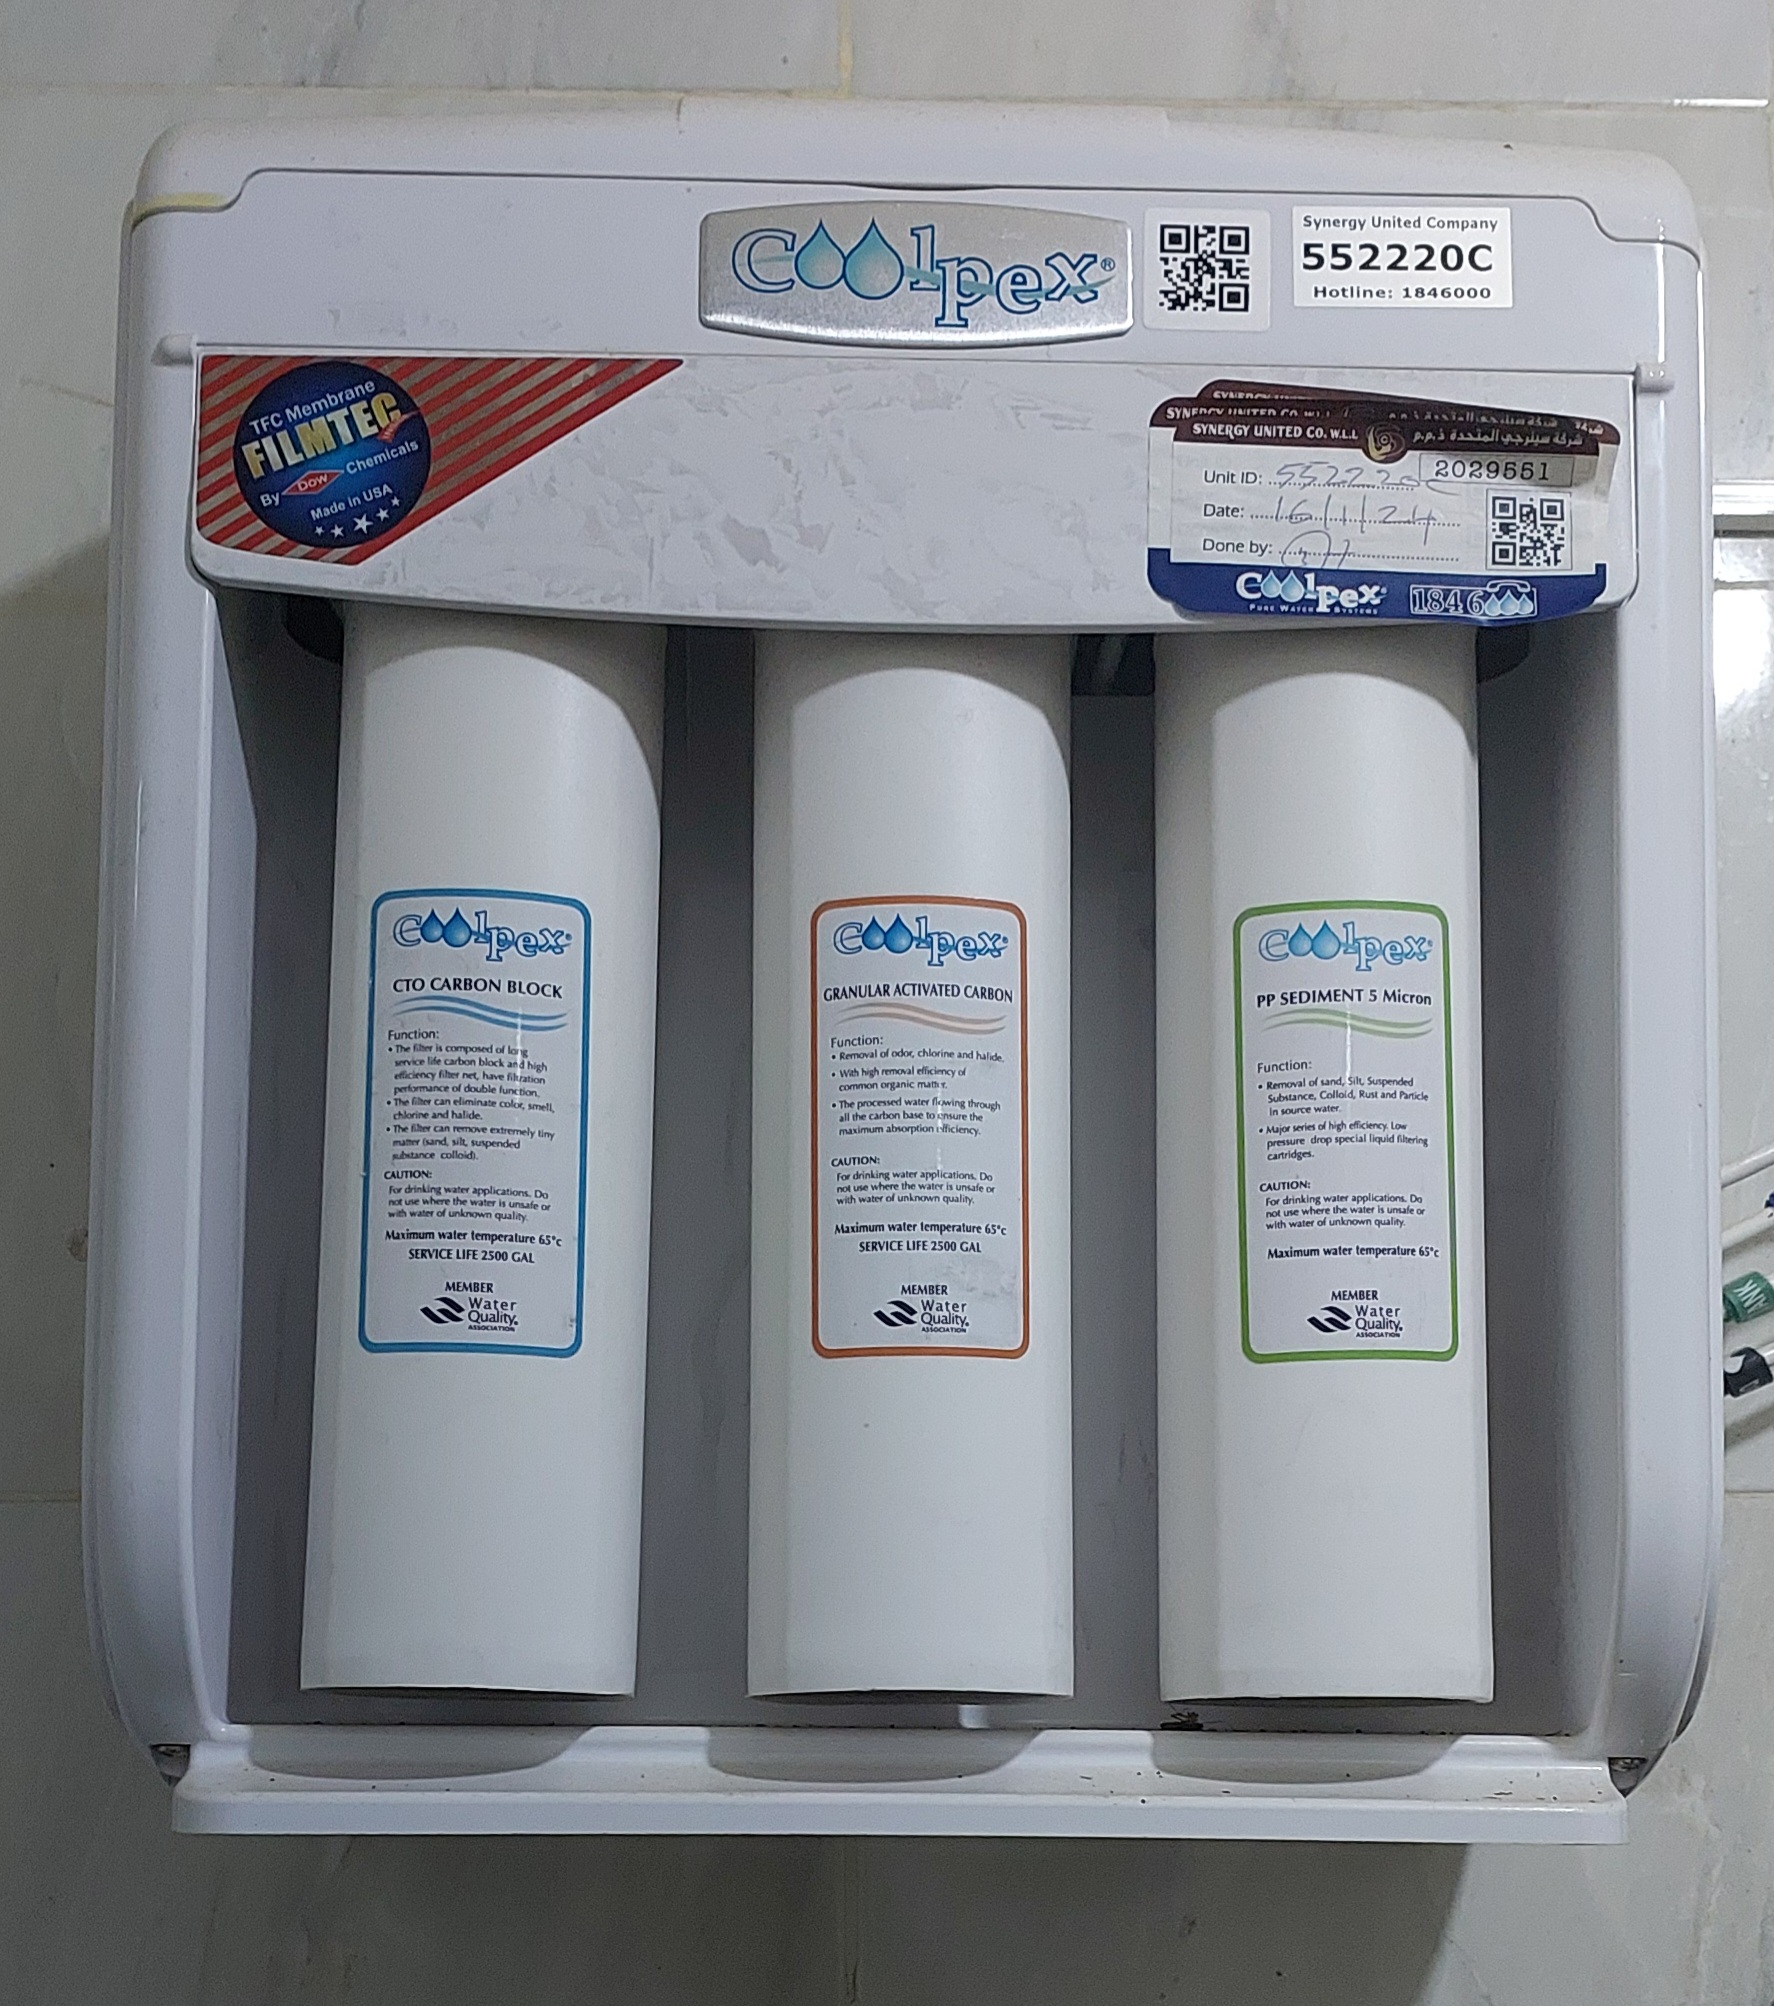 Coolpex water purifier for sale.